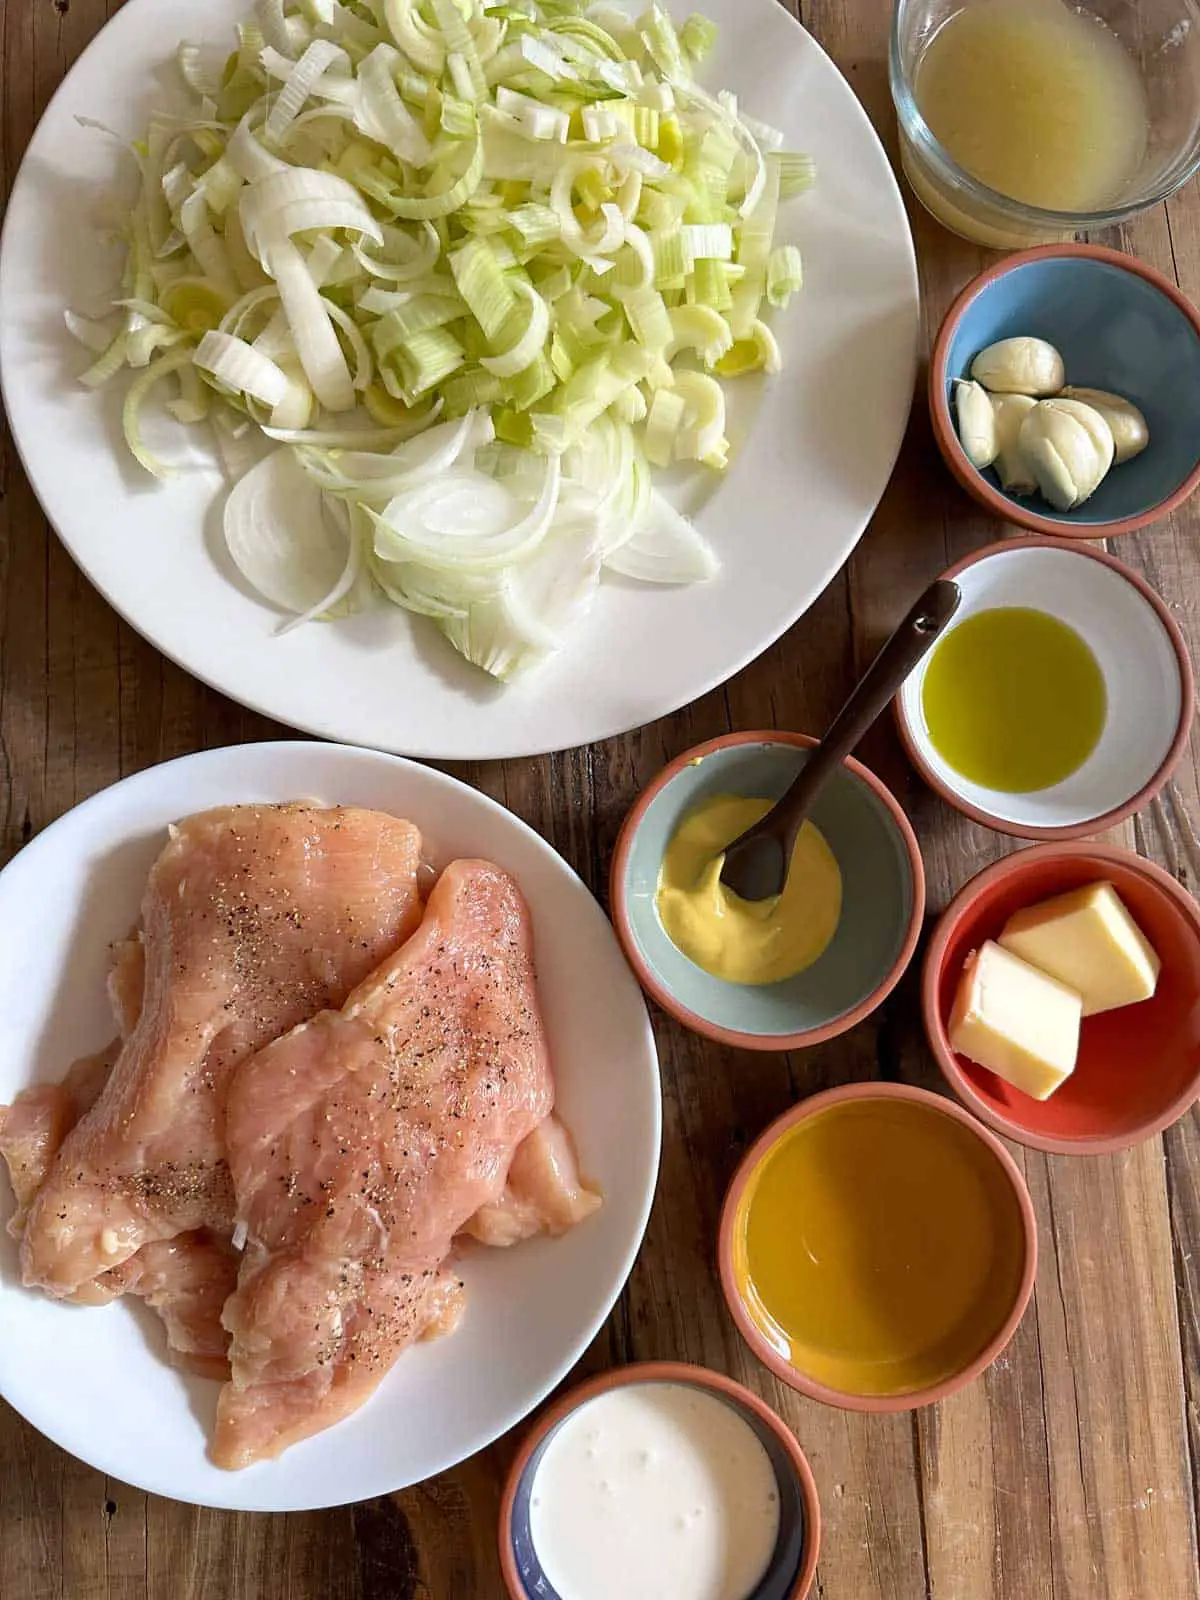 A white bowl filled with sliced leeks and onions, and another white bowl containing seasoned chicken breasts. Small bowls containing chicken broth, garlic, olive oil, mustard, butter, wine, and heavy cream.